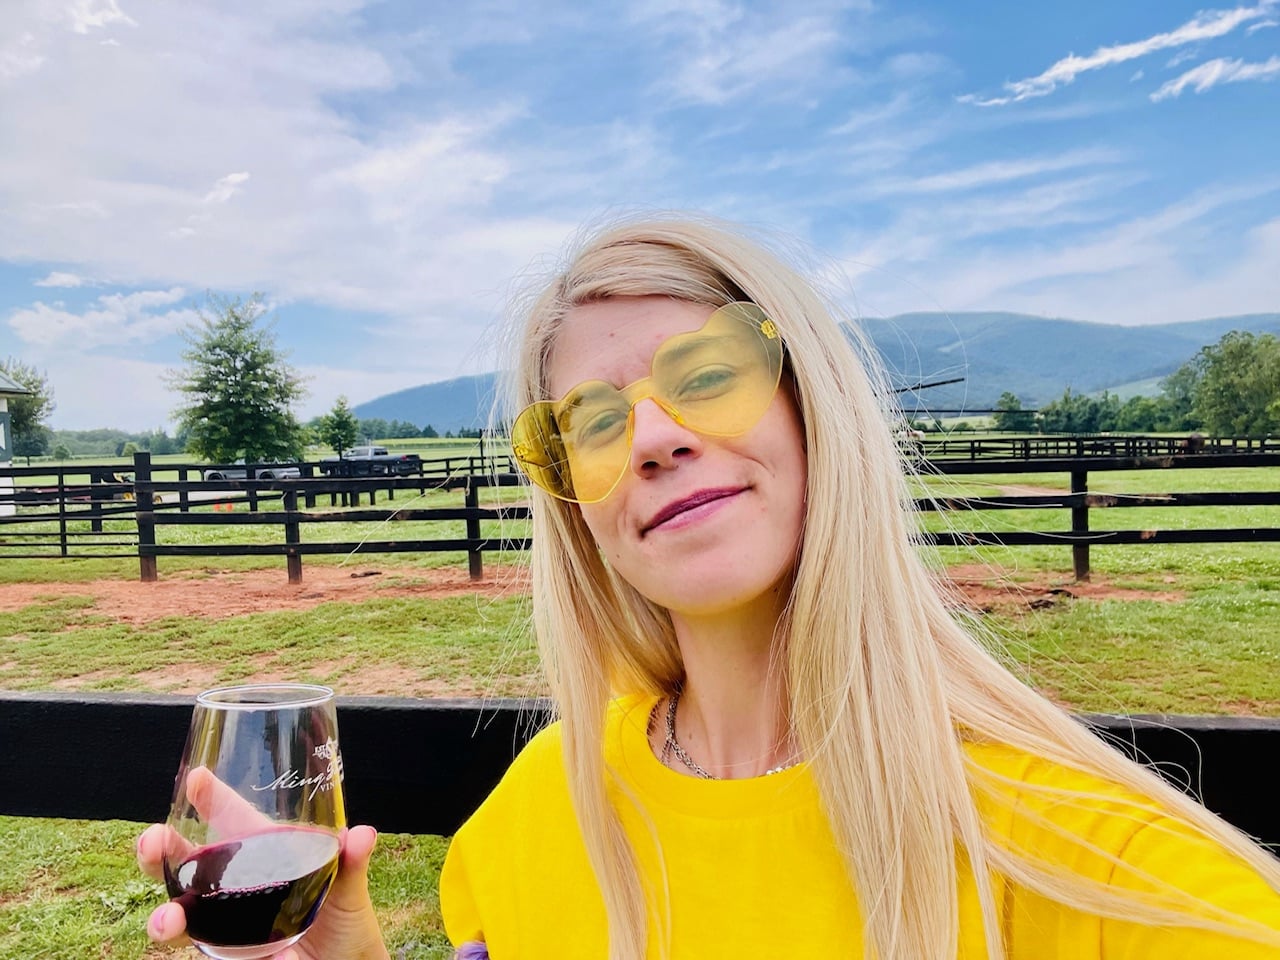 Rachel with a glass of wine and yellow sunglasses on a farm.